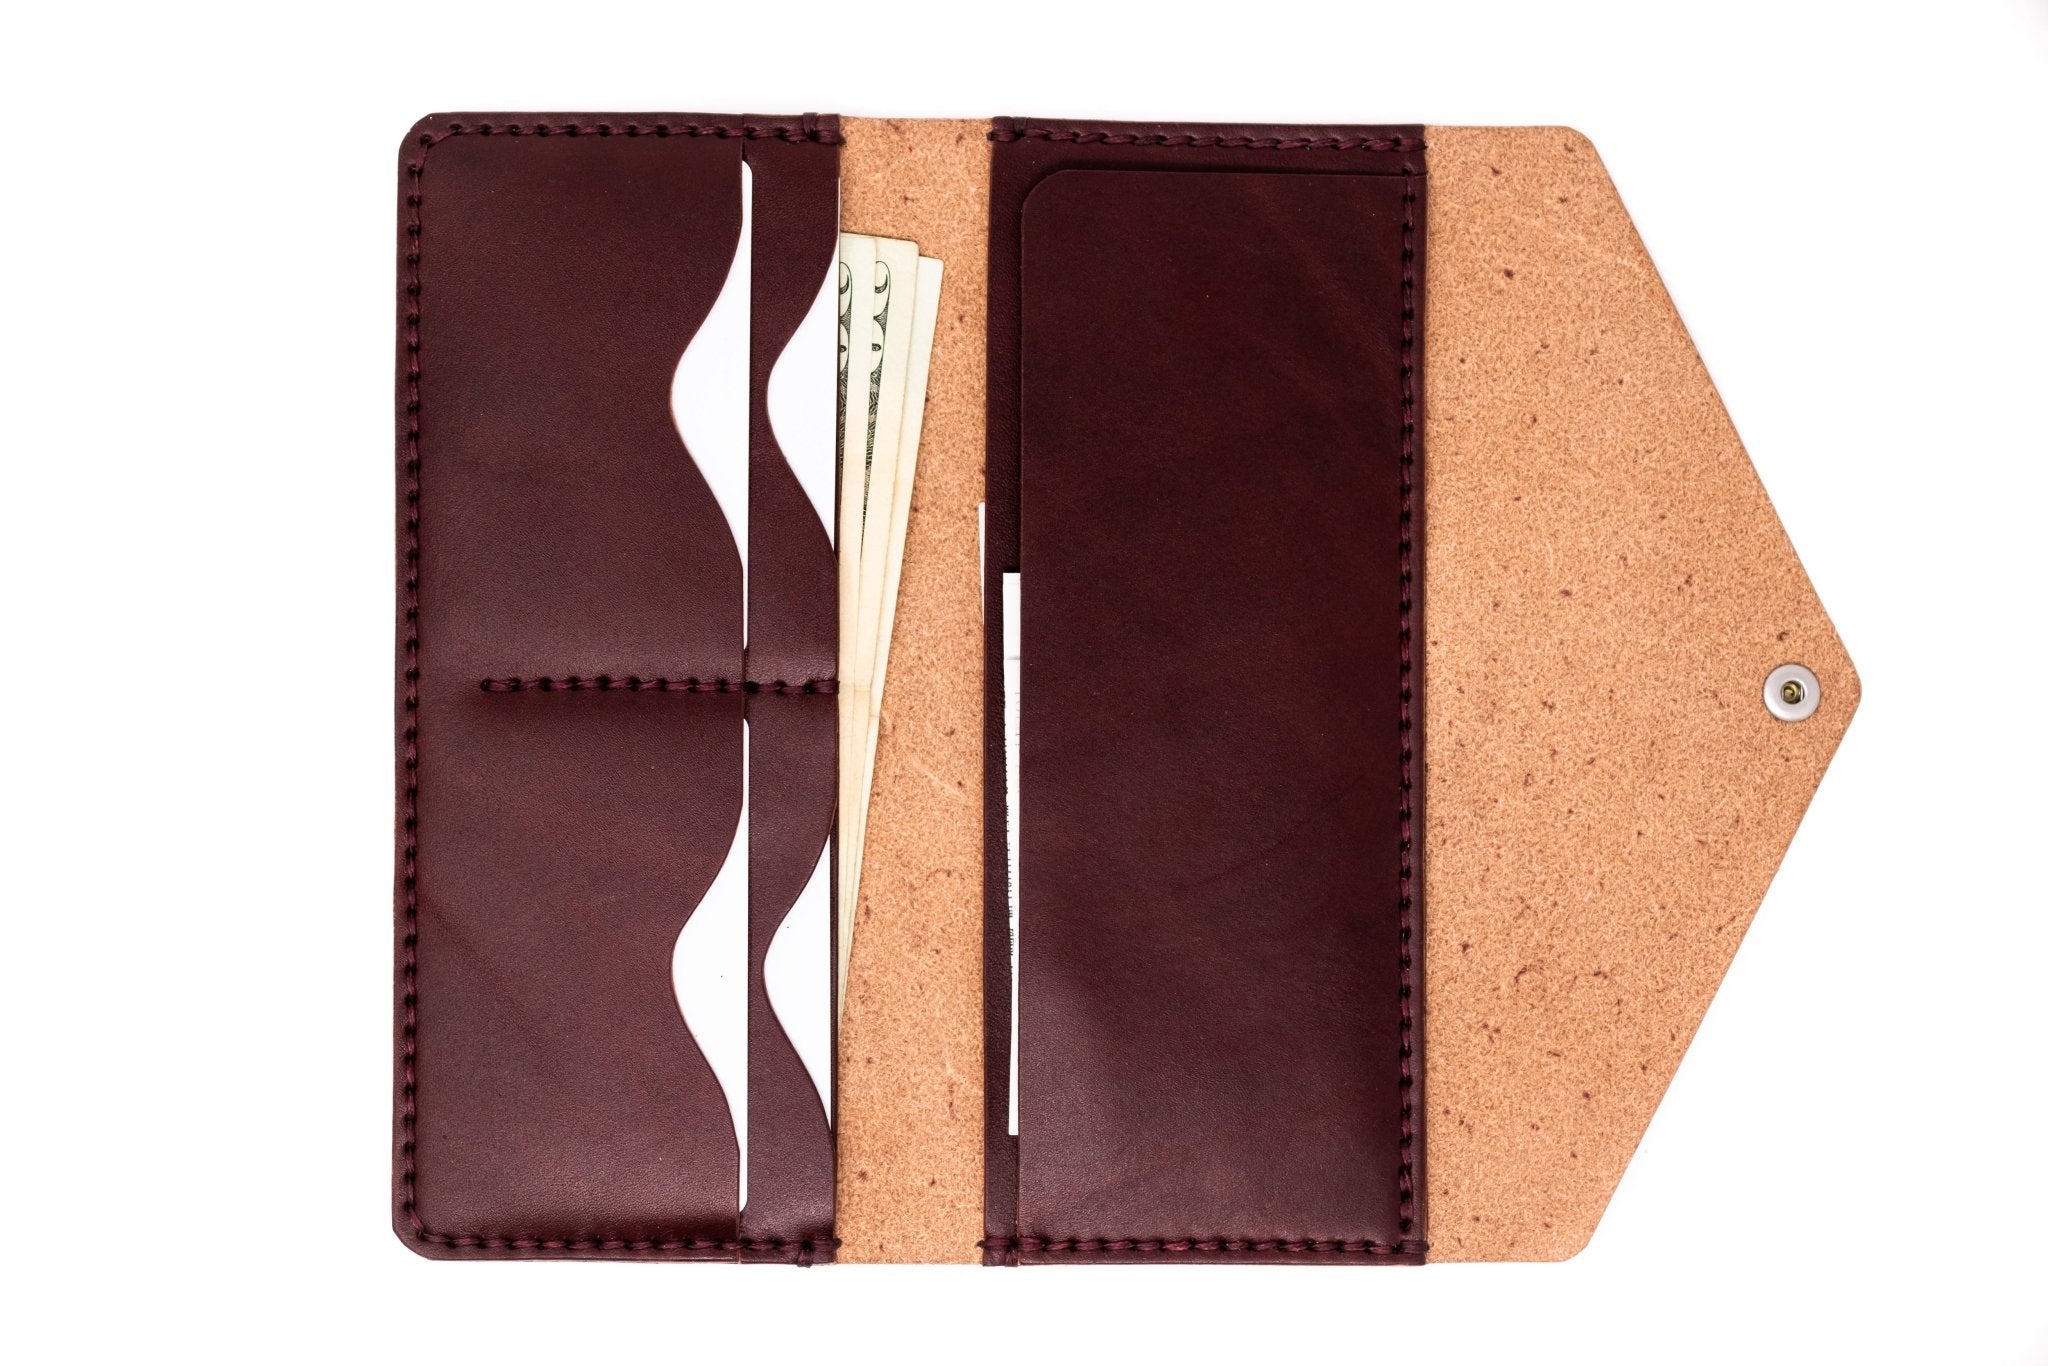 The Avery - Lost Dutchman Leather handmade leather wallets